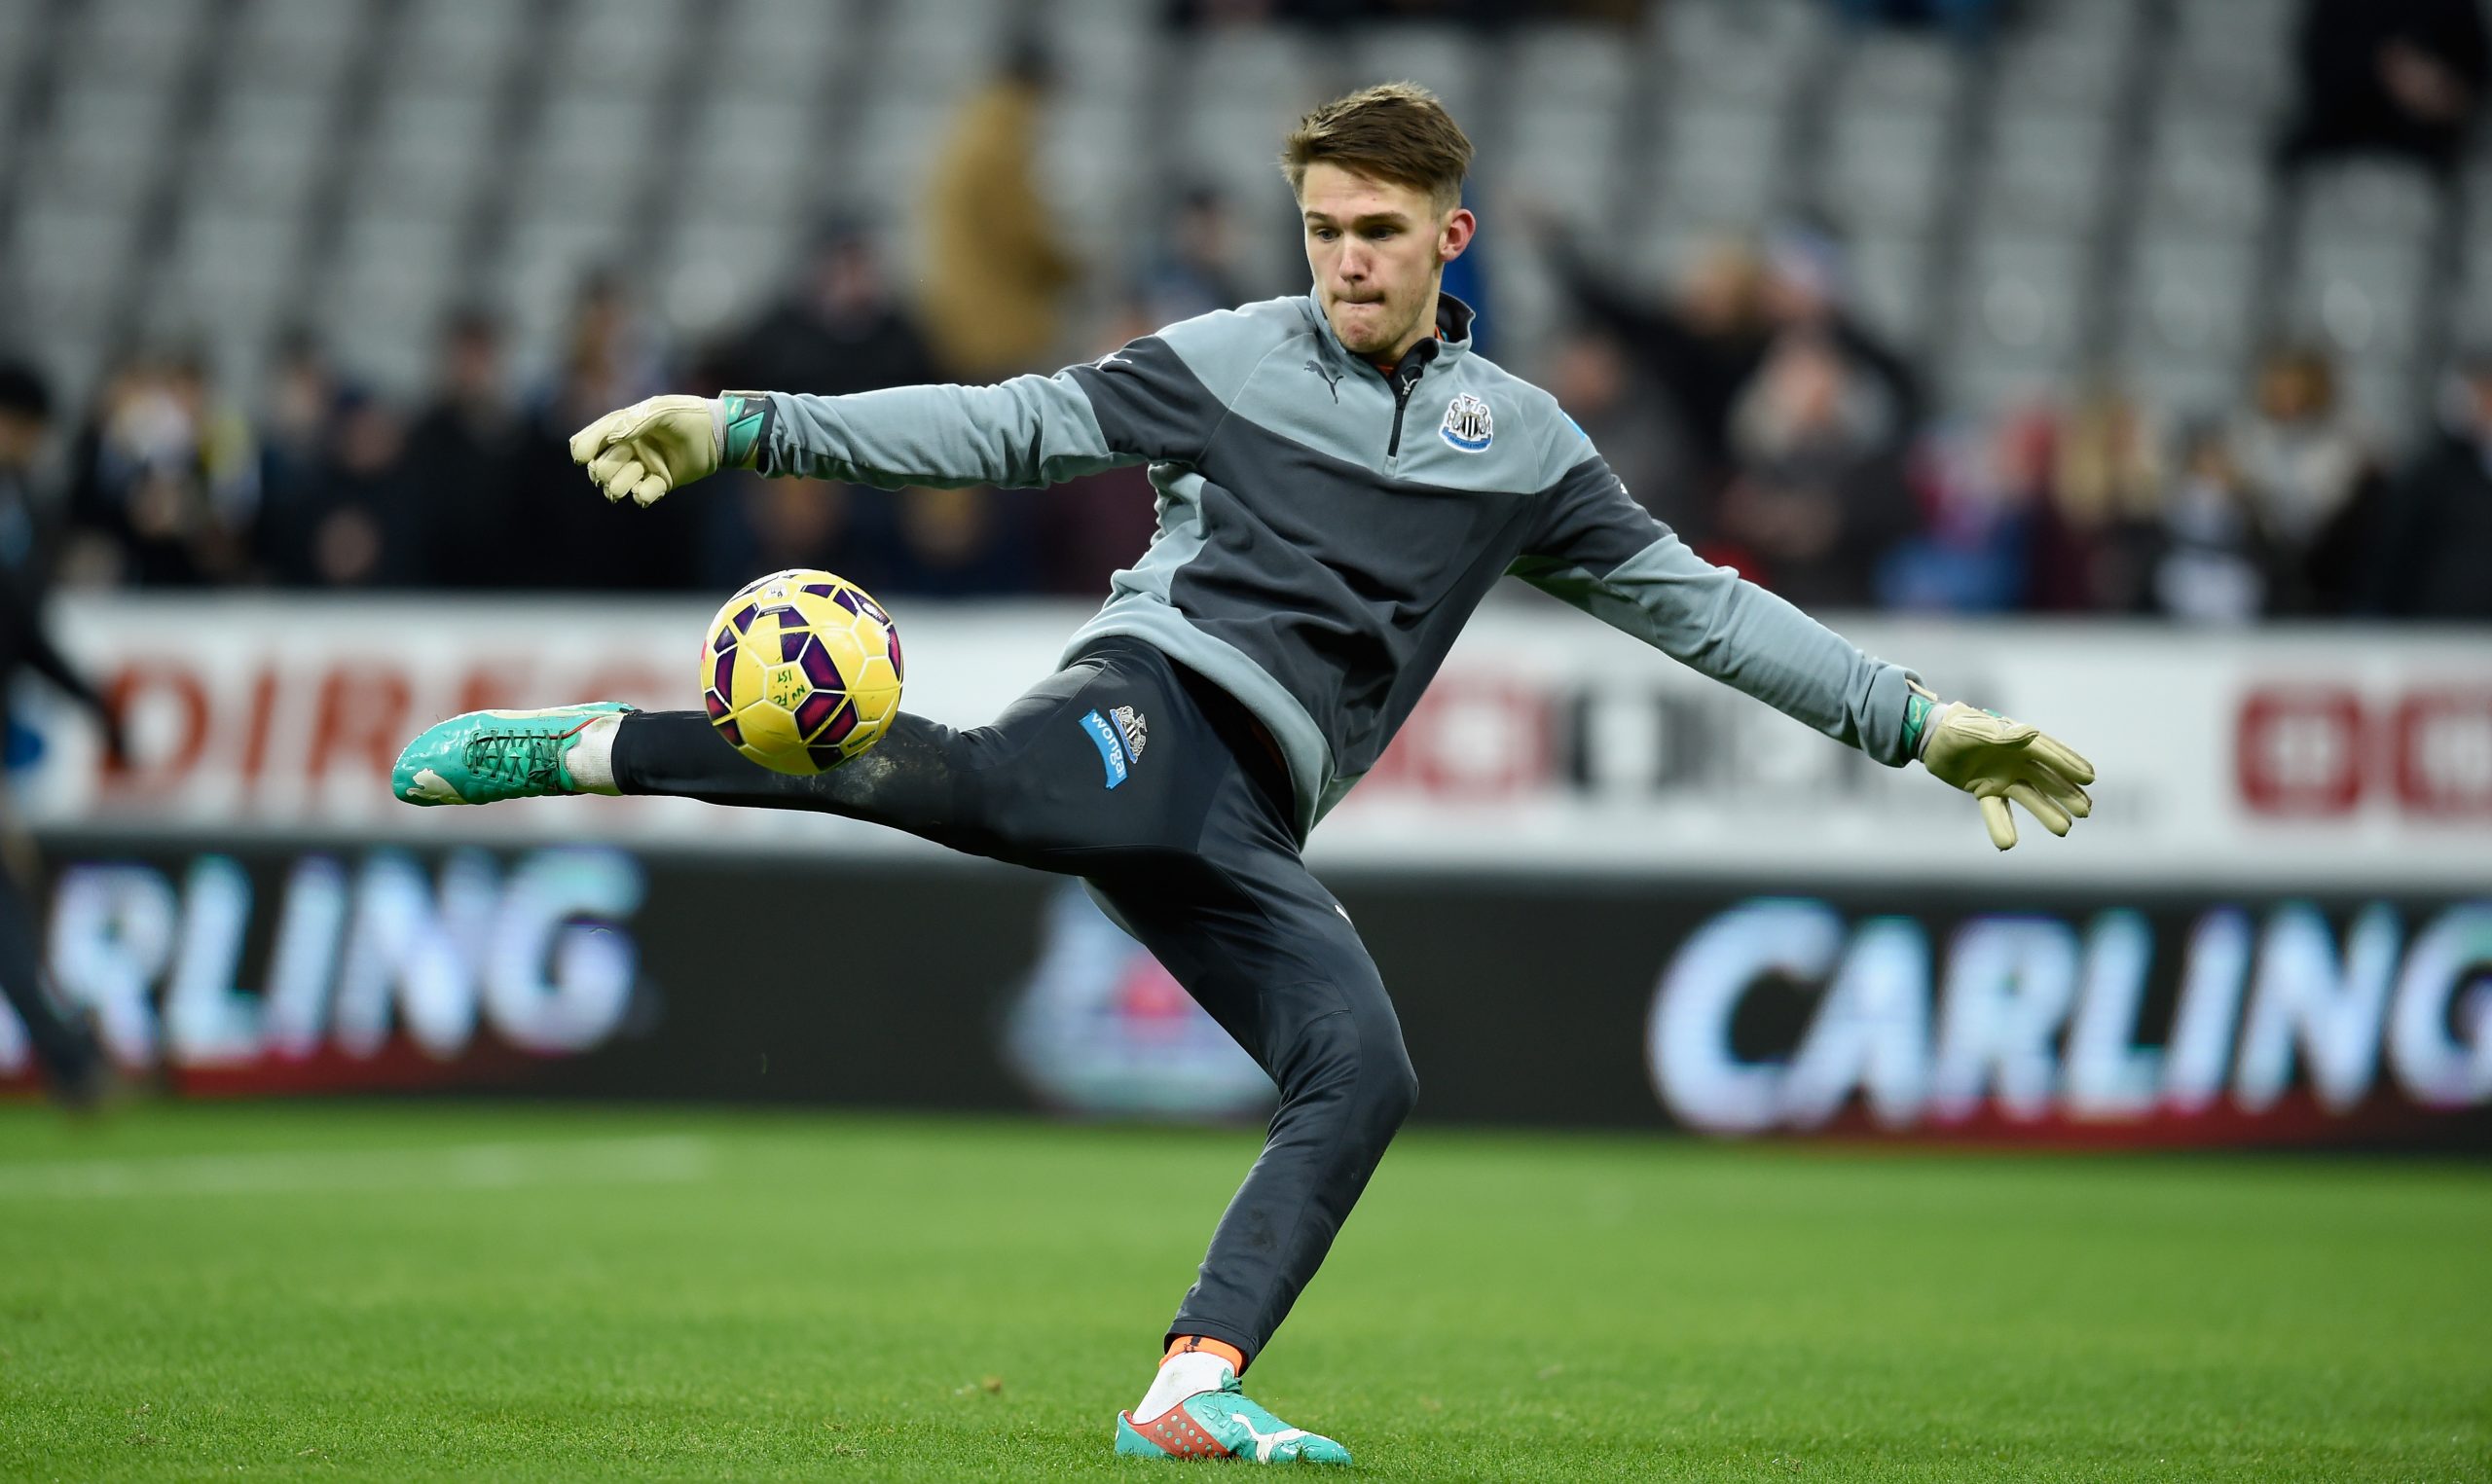 Arsenal eyeing a move for Newcastle United's Freddie Woodman who is in action in the picture